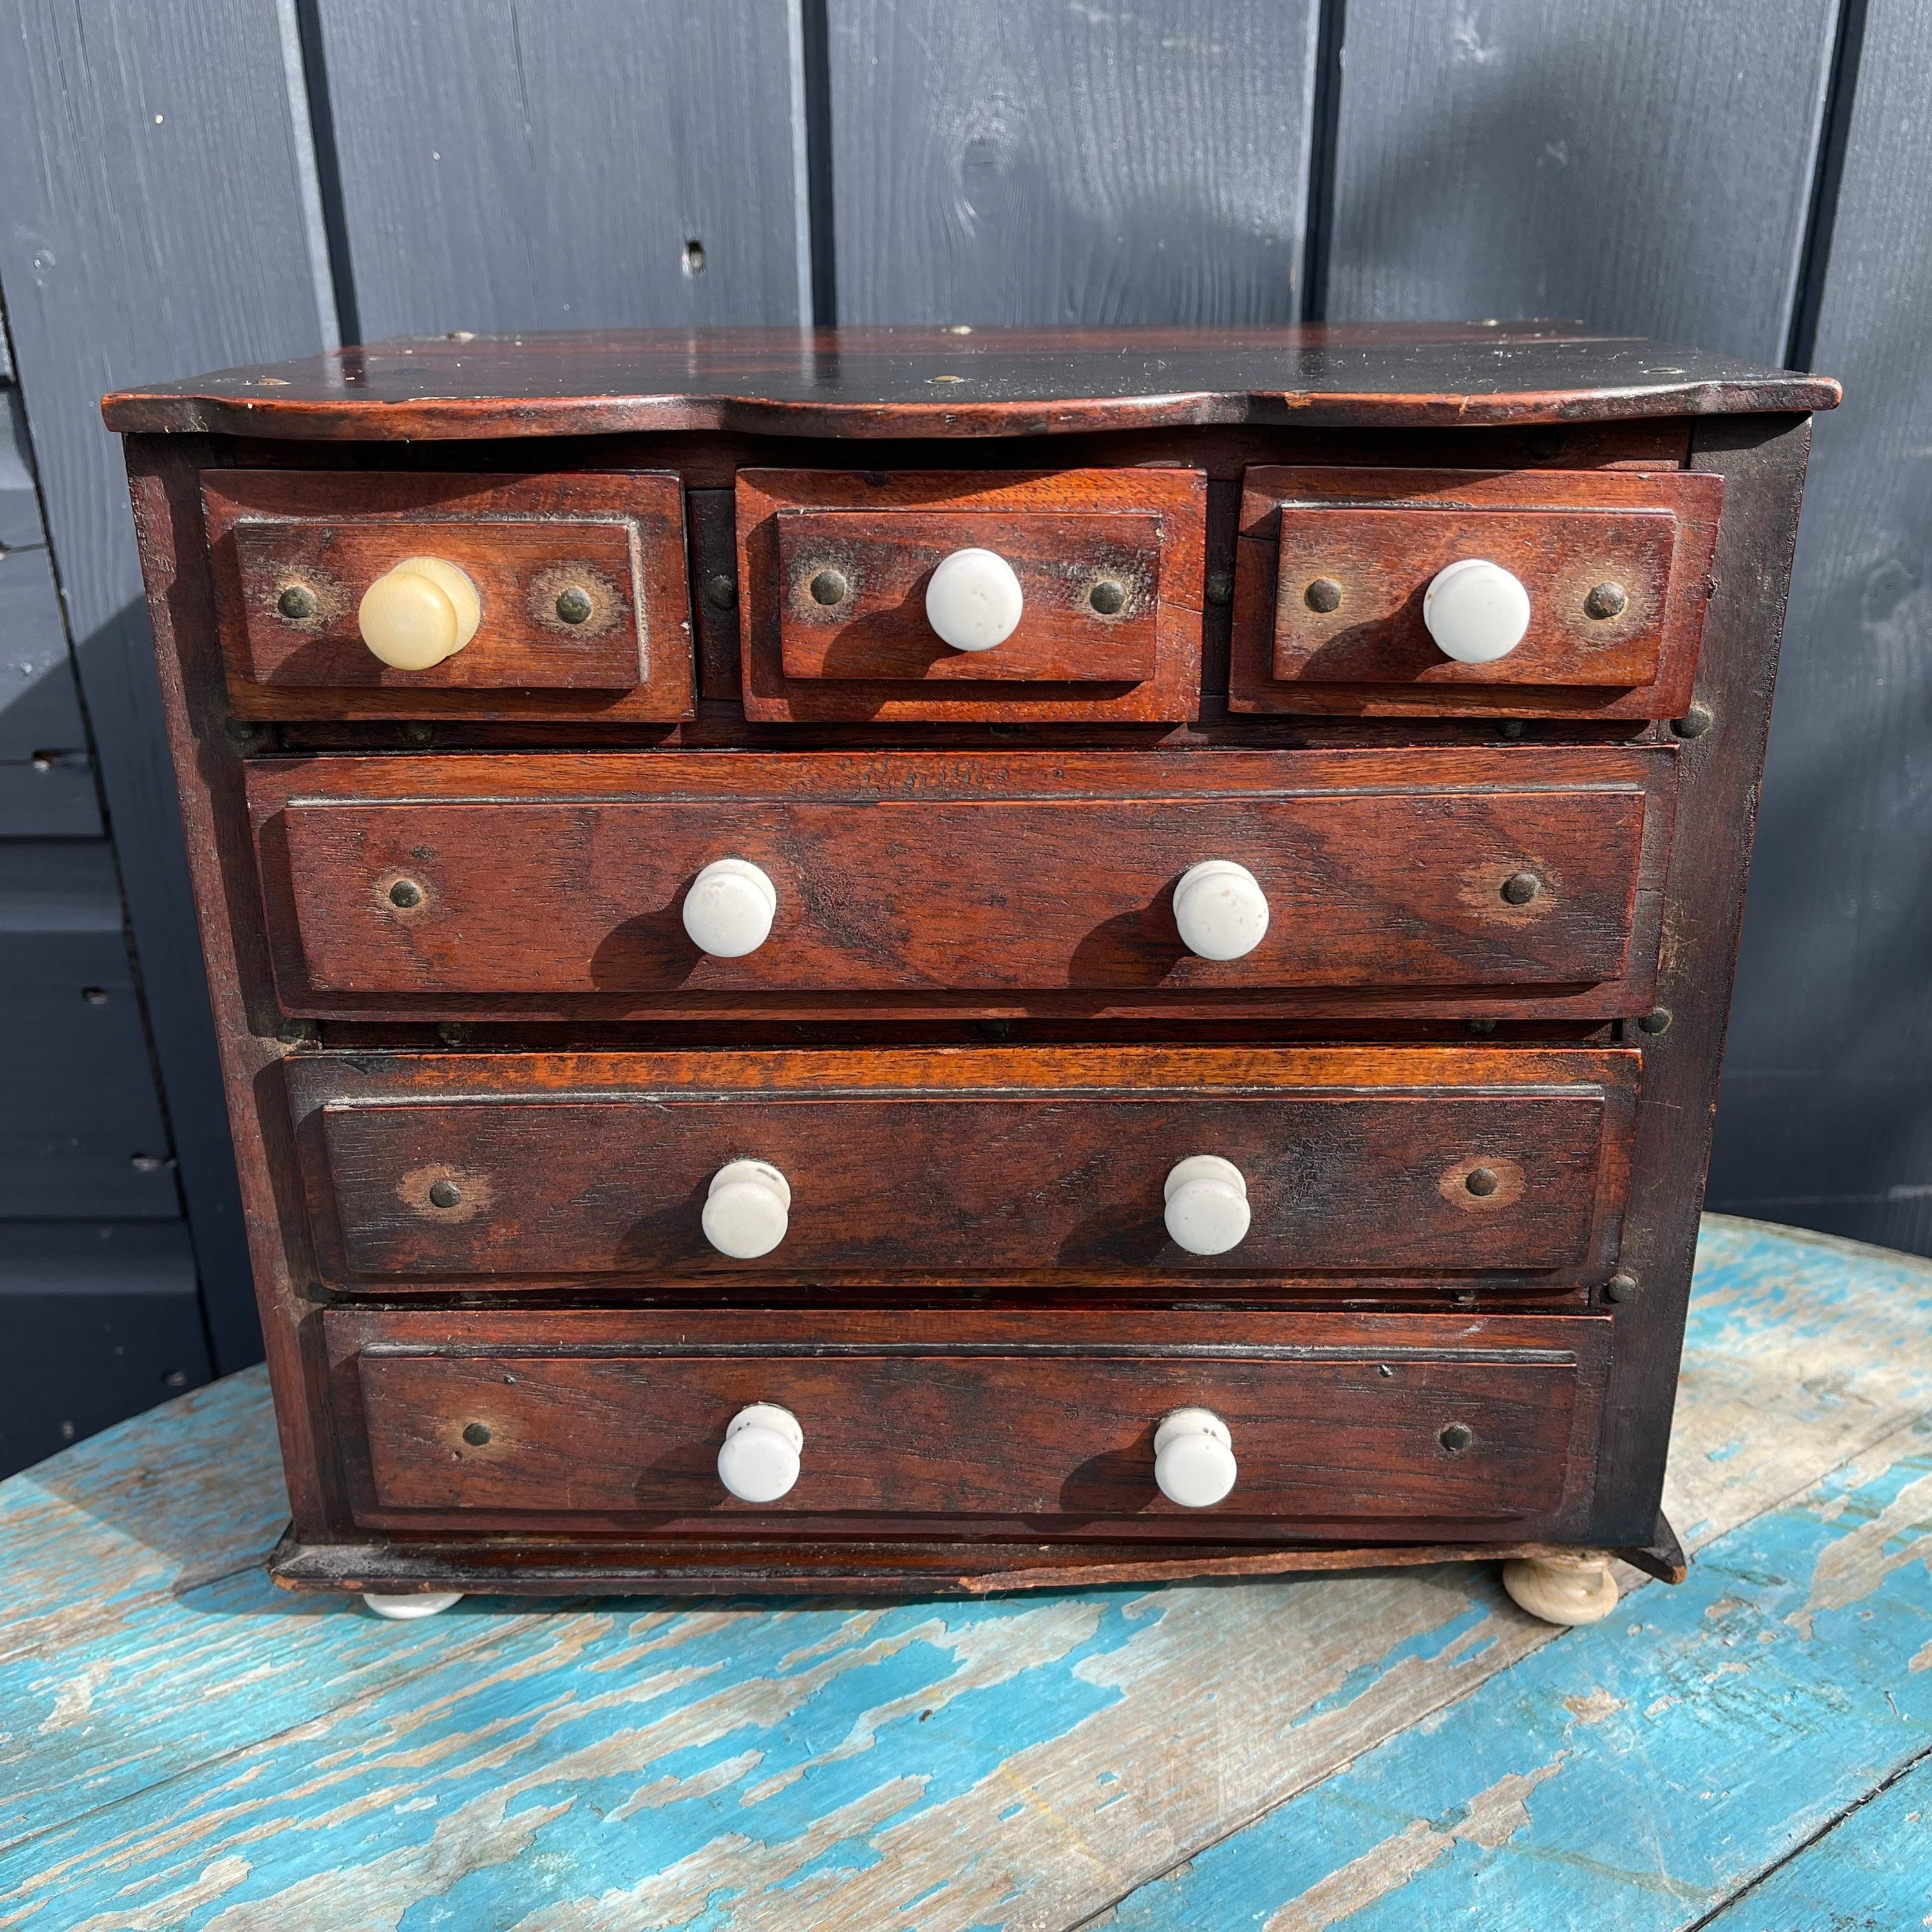 Vintage Sewing Cabinet With Wooden Drawers Organizer for Pins